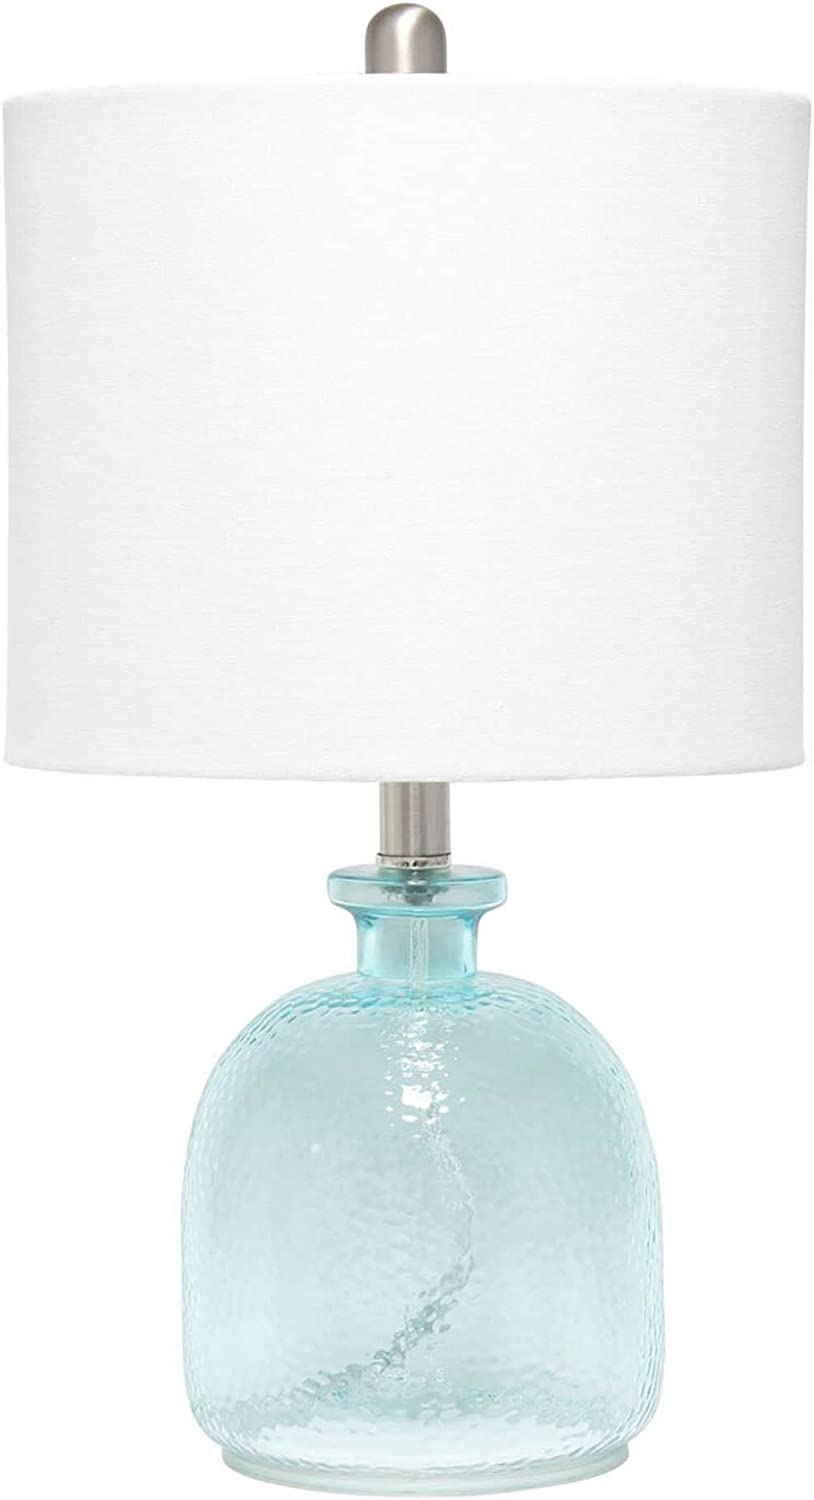 Lalia Home Contemporary Mercury Hammered Glass Jar Table Lamp with White Linen Shade